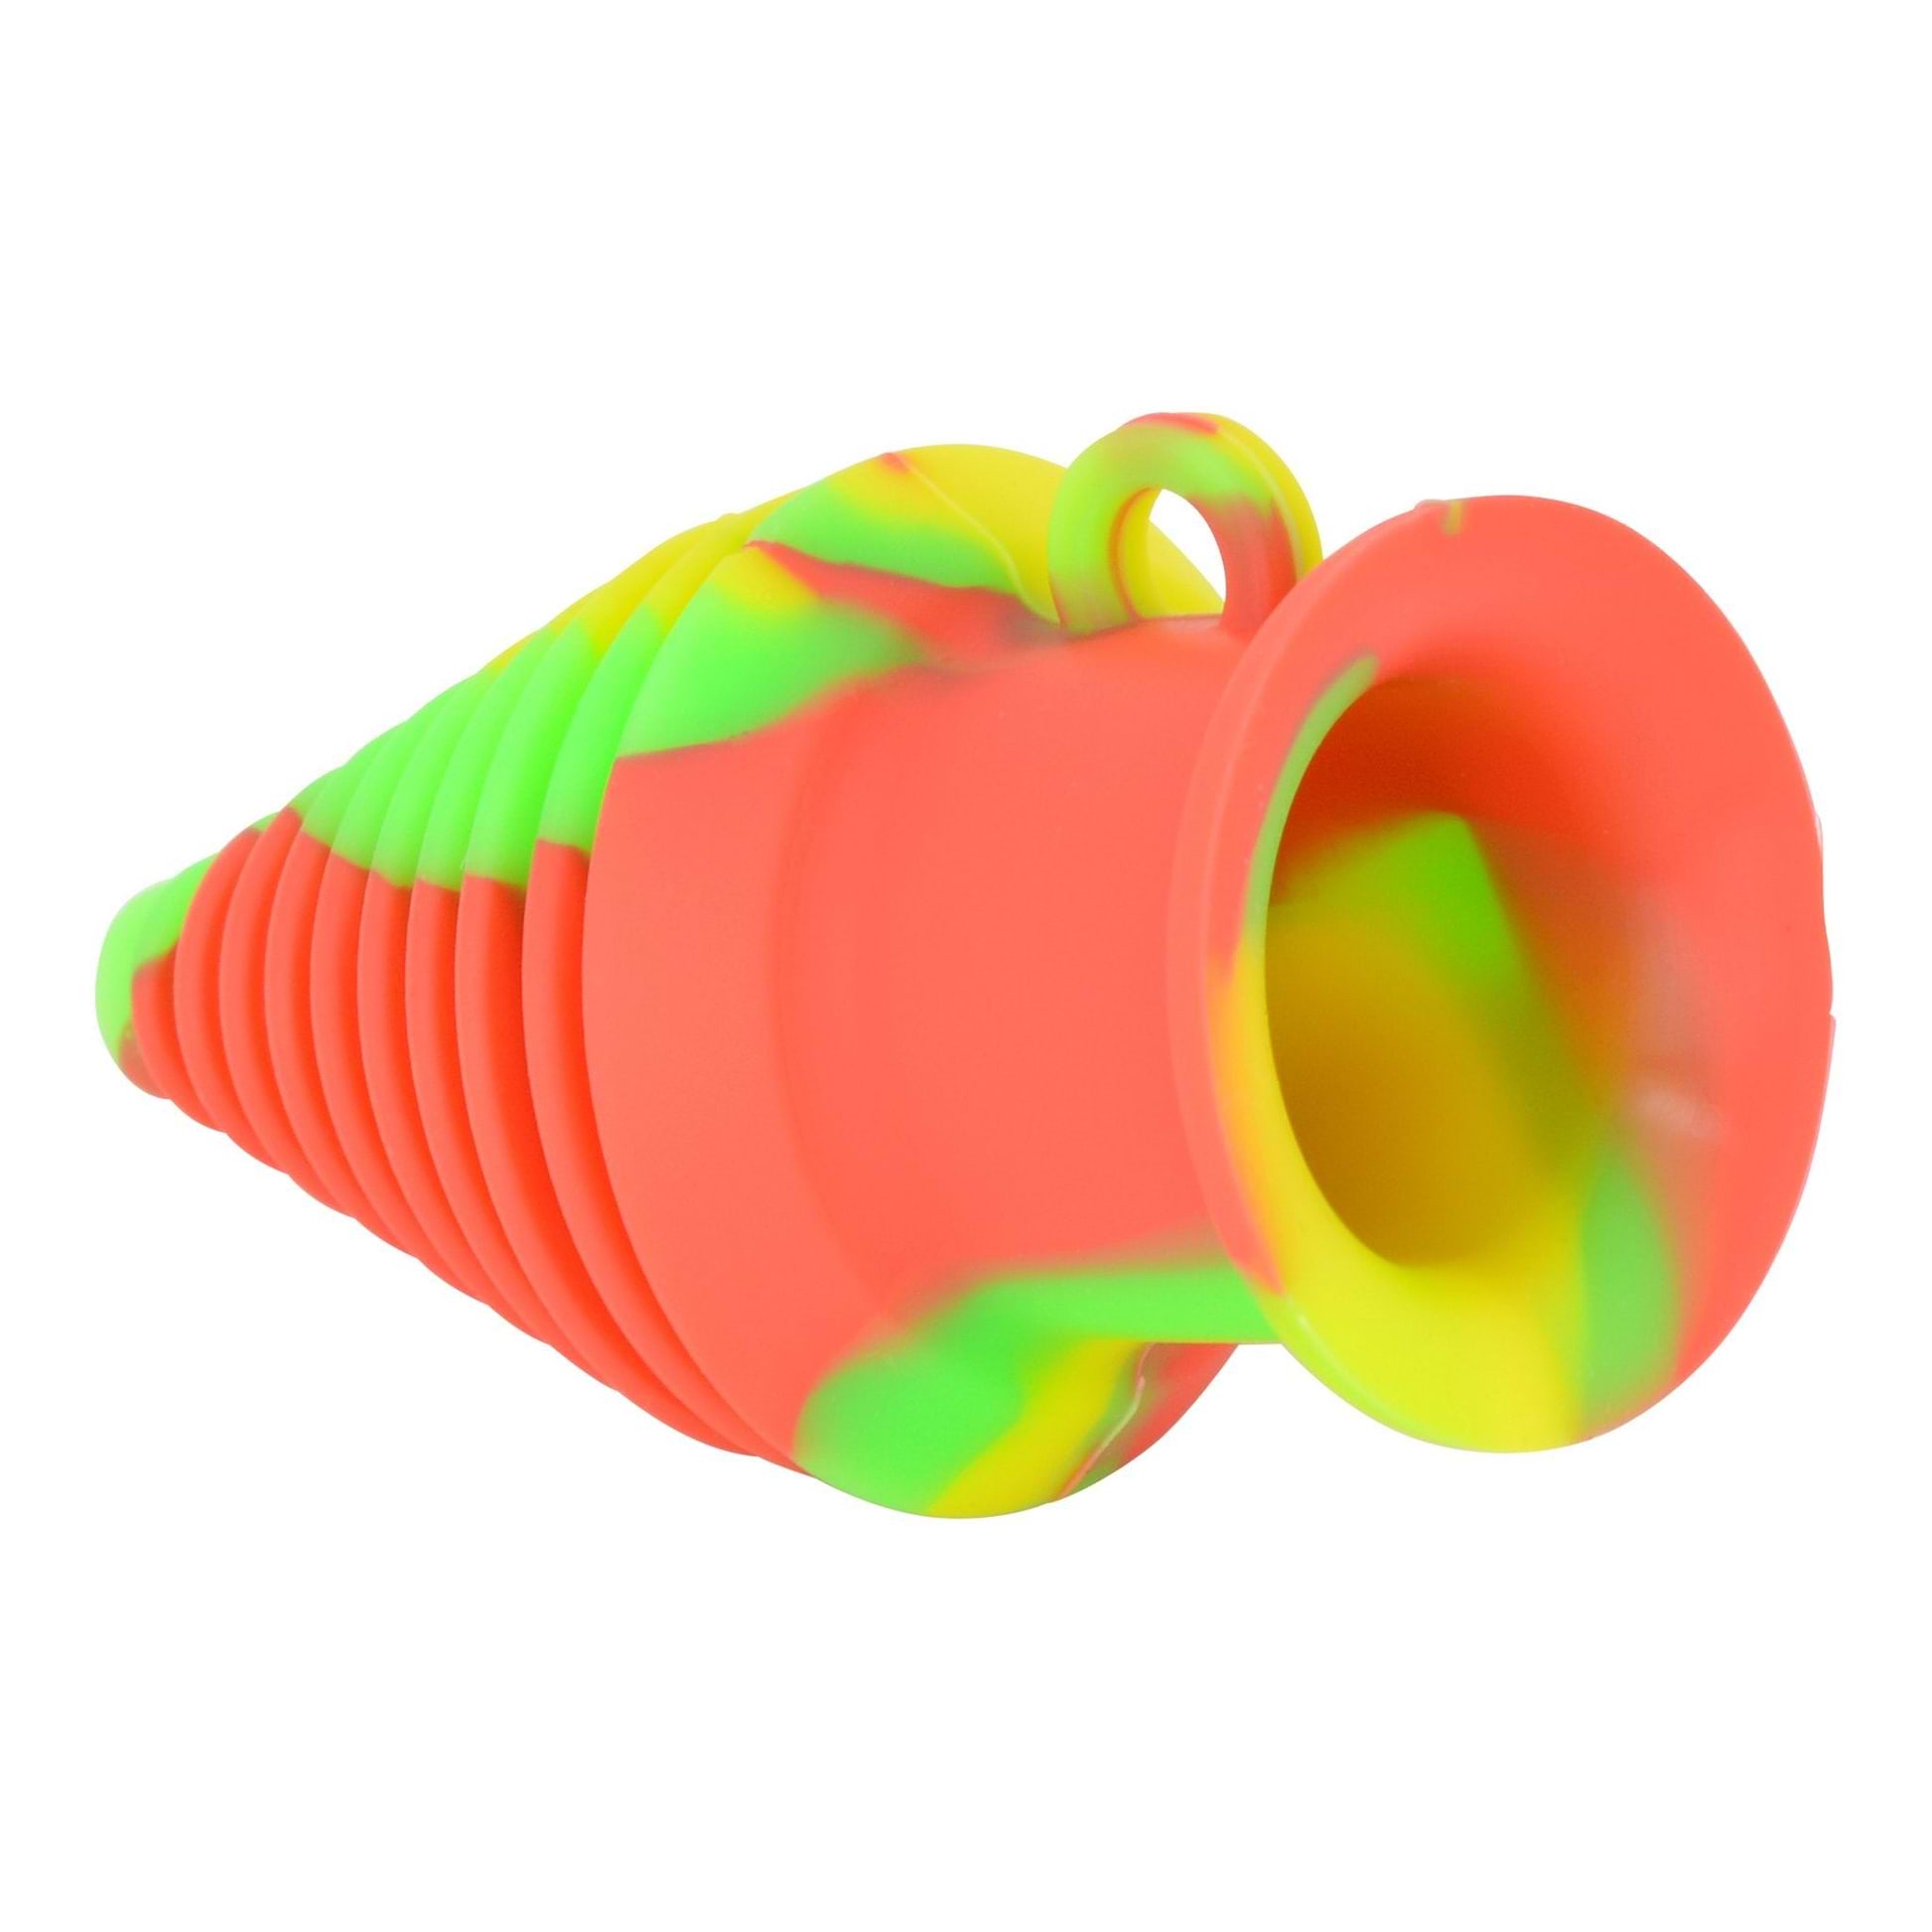 Colorful silicone bong mouthpiece smoking accessory in a cone, Christmas tree shape vibrant combination of colors